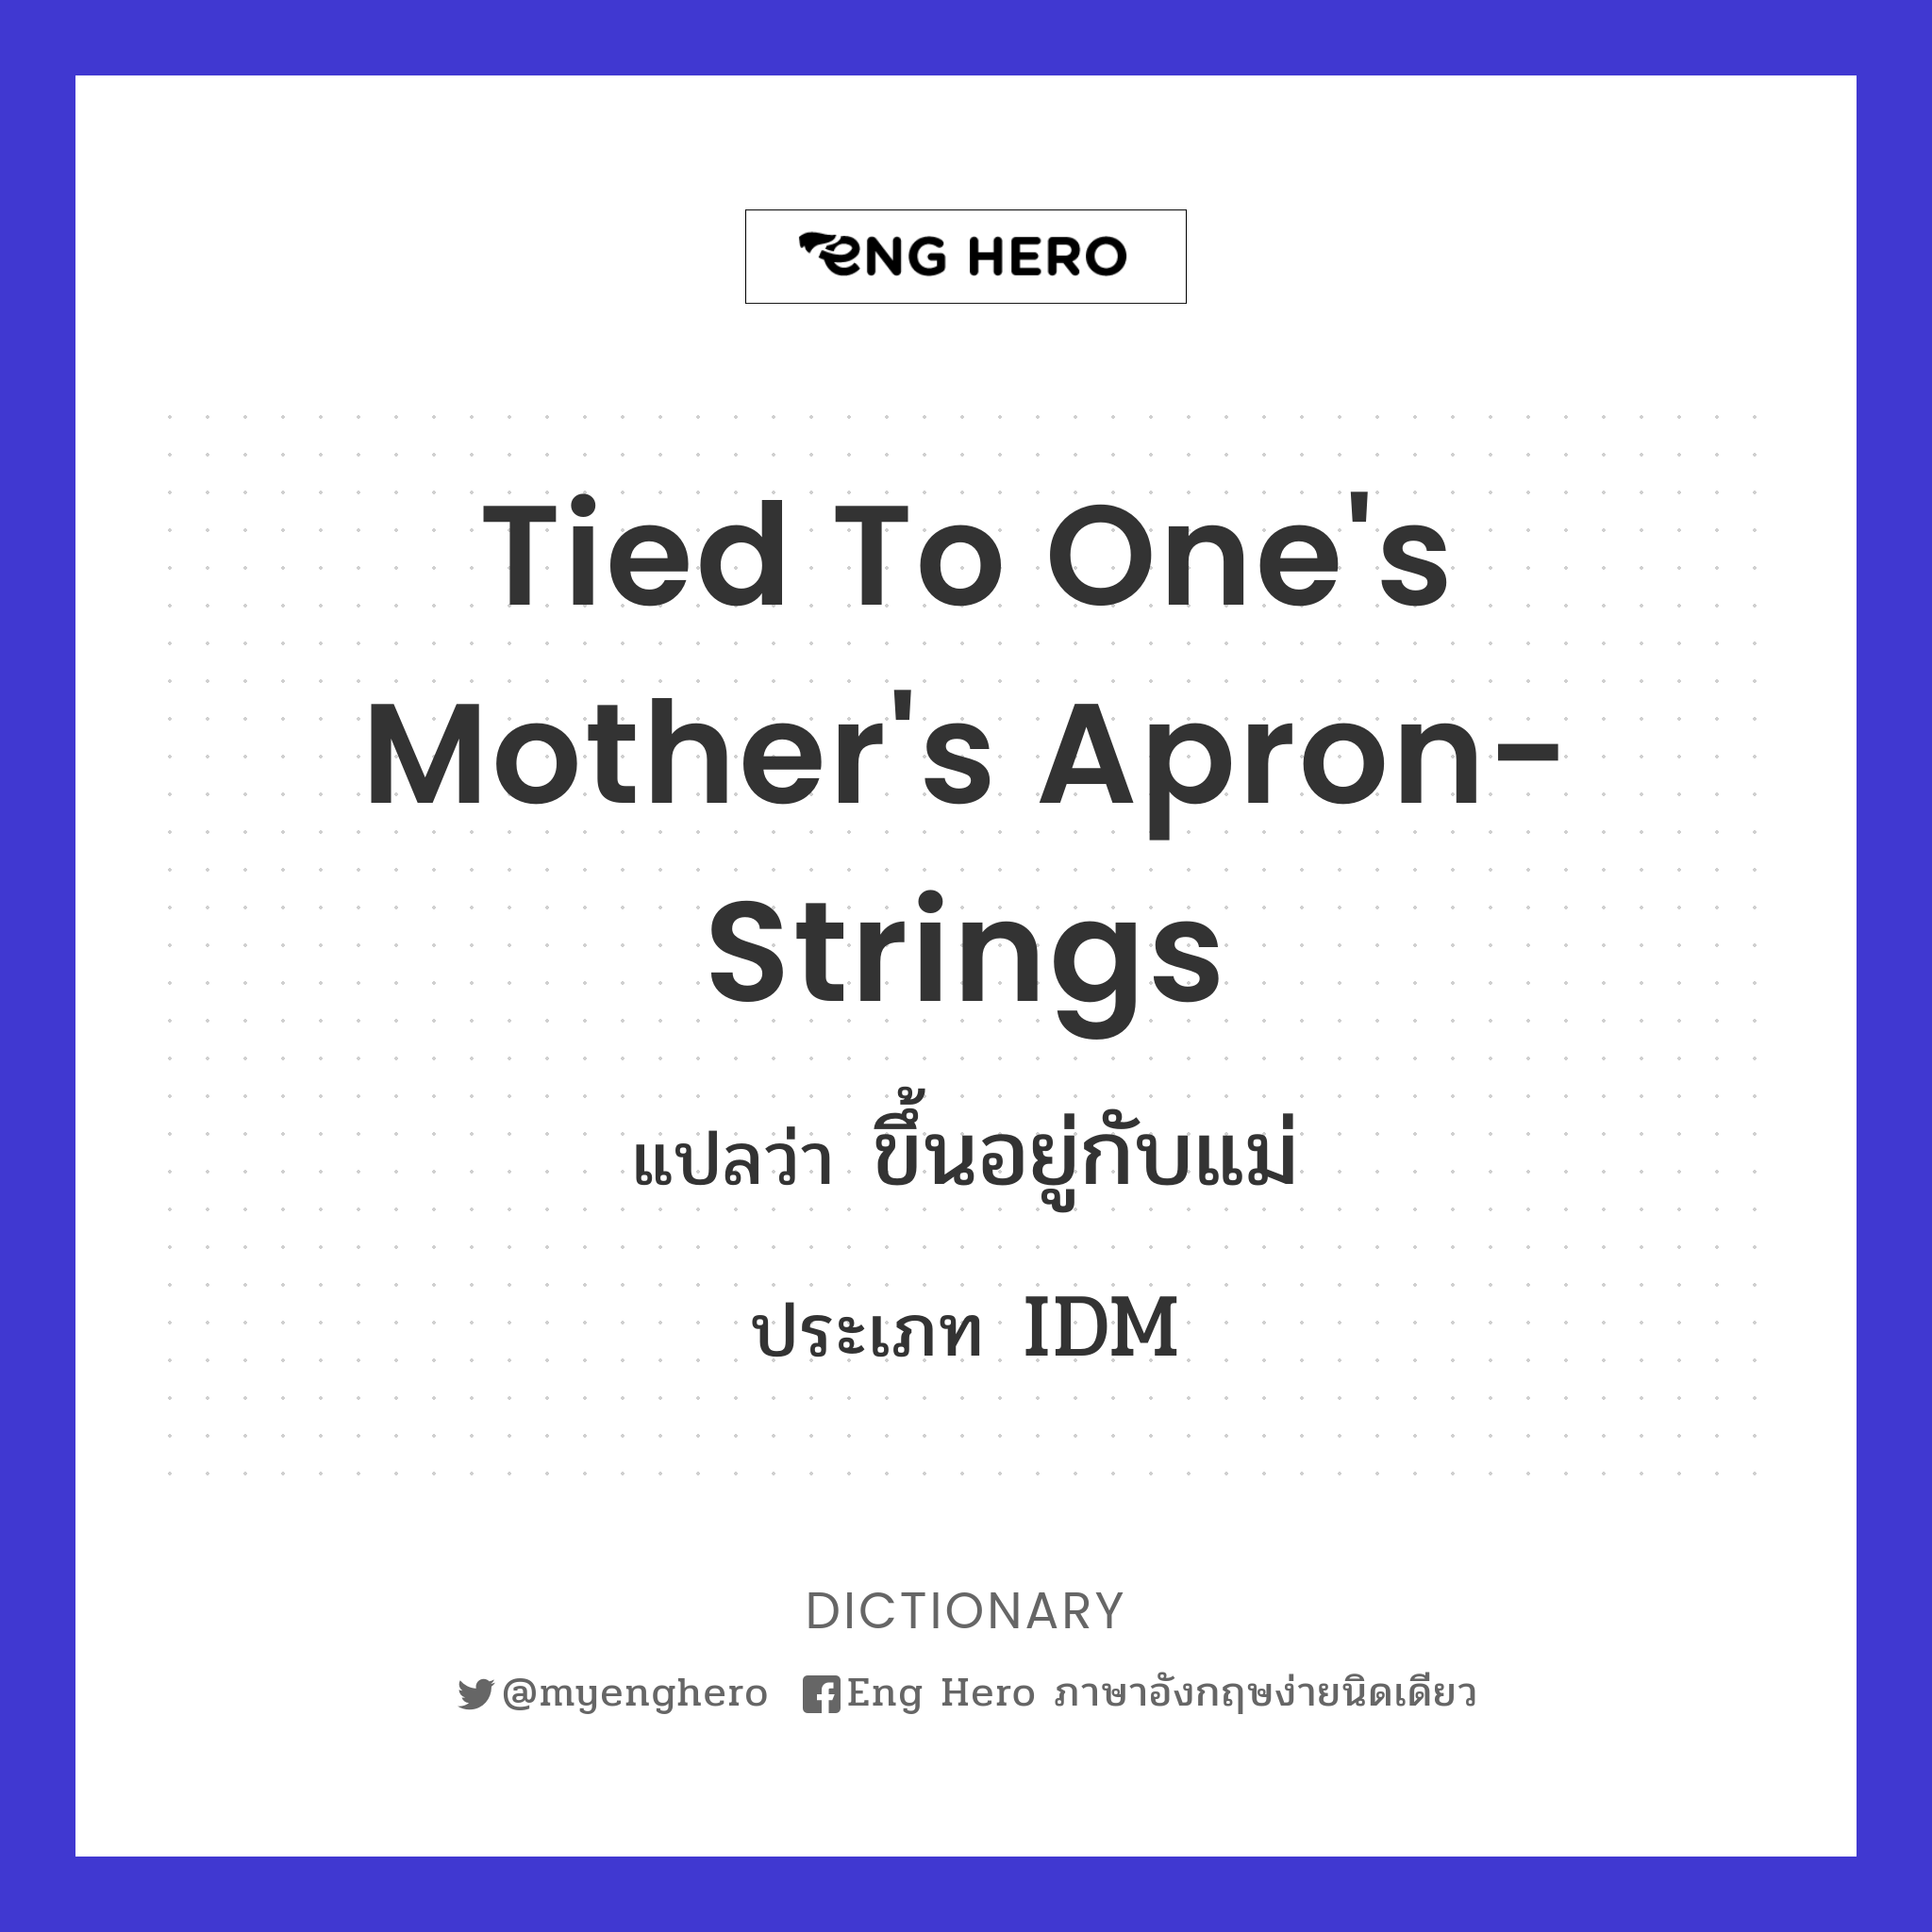 tied to one's mother's apron-strings